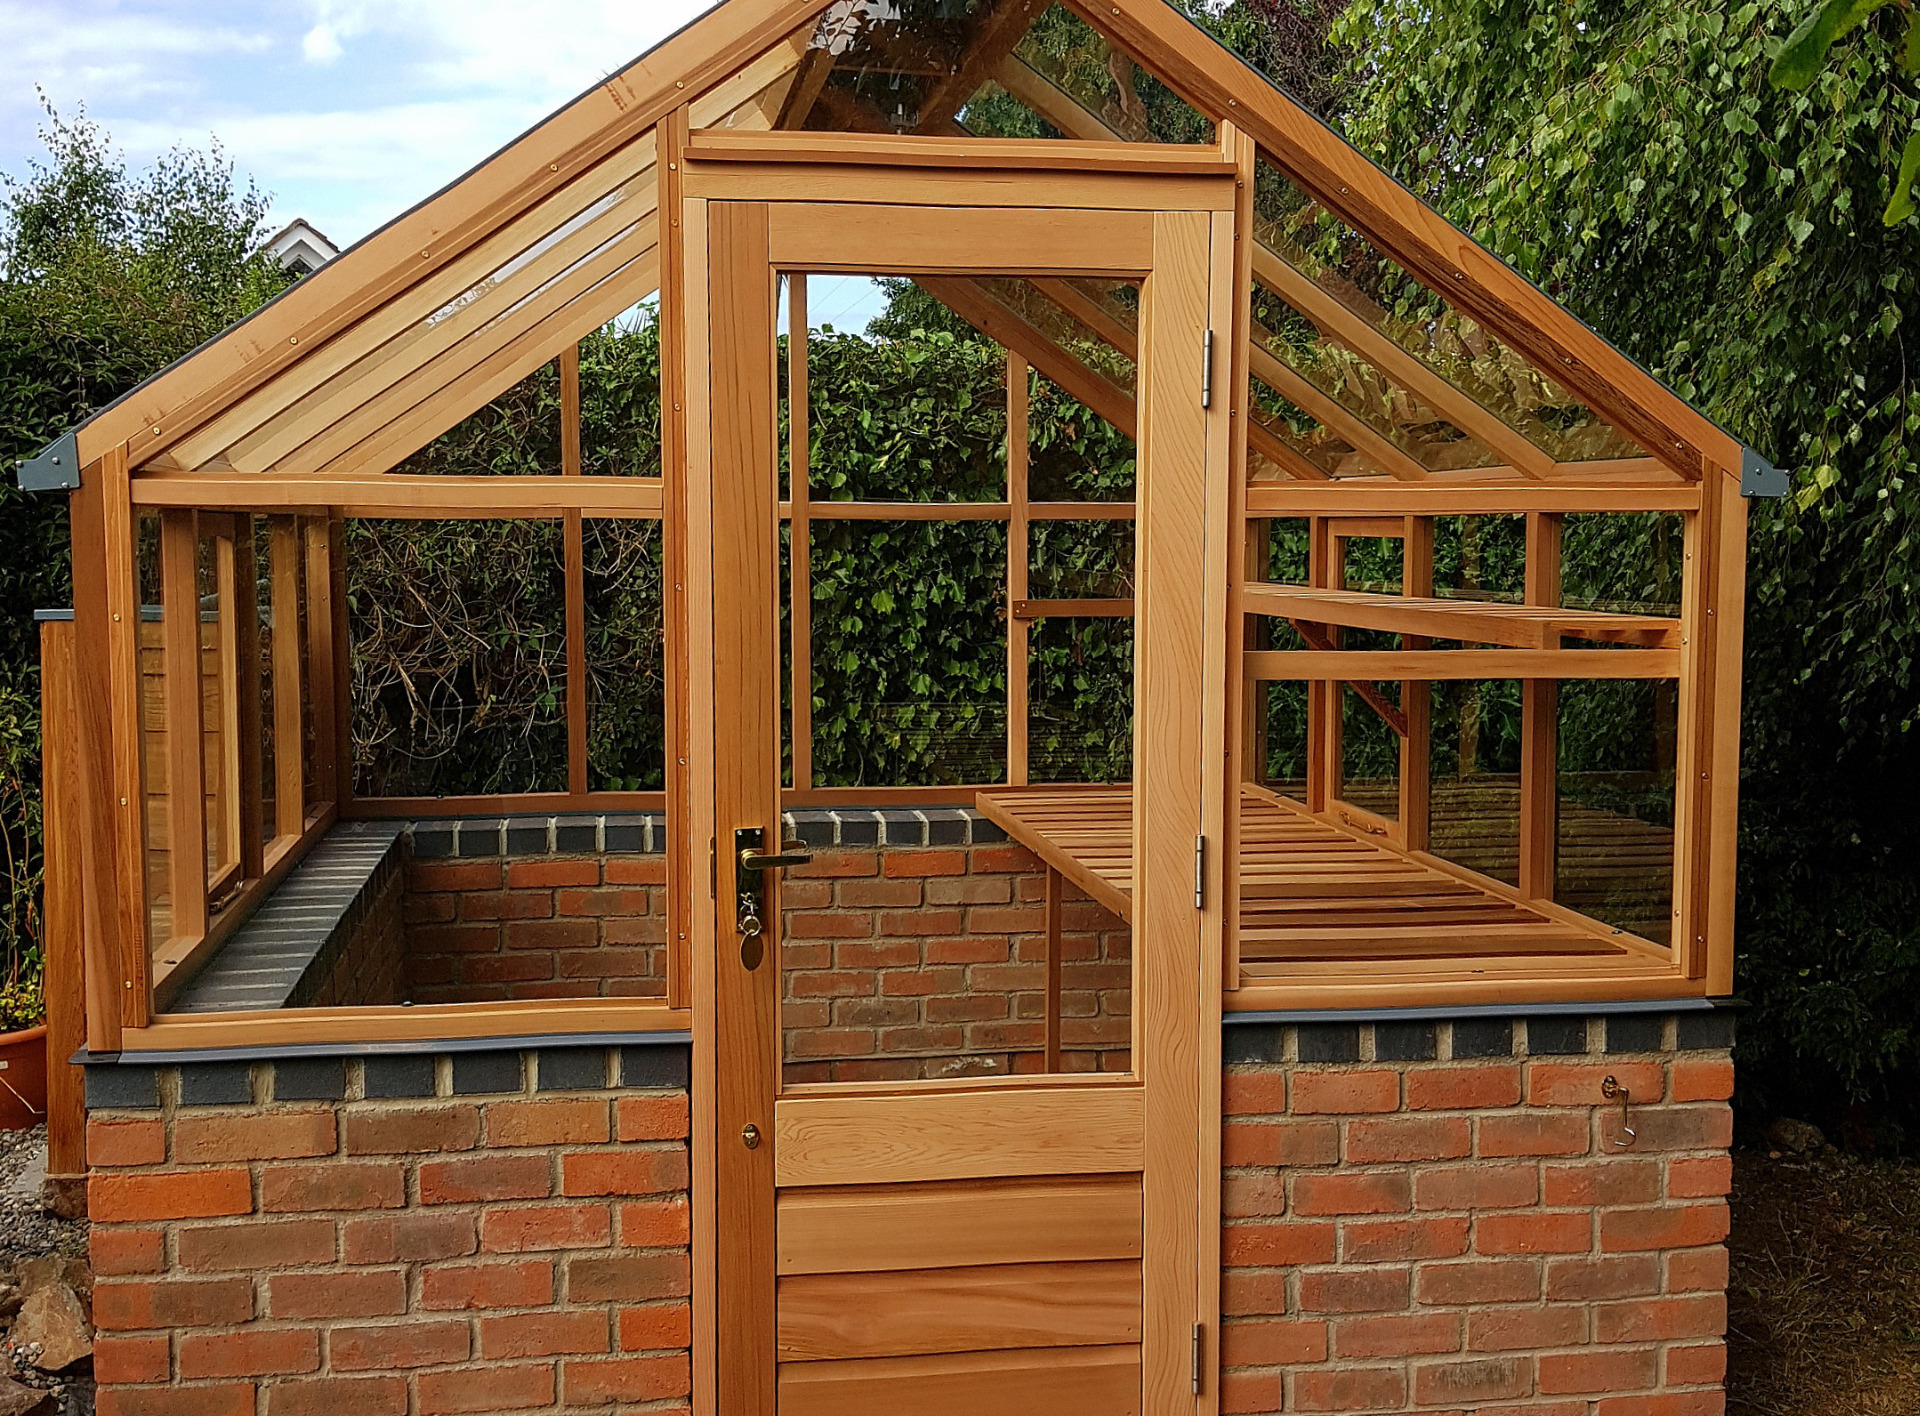 Gabriel Ash Classic Eight (8 x 8) Greenhouse on brick wall and with hinged door entrance in Dublin 18 | the only timber greenhouses endorsed by the RHS | Owen Chubb  087-2306128